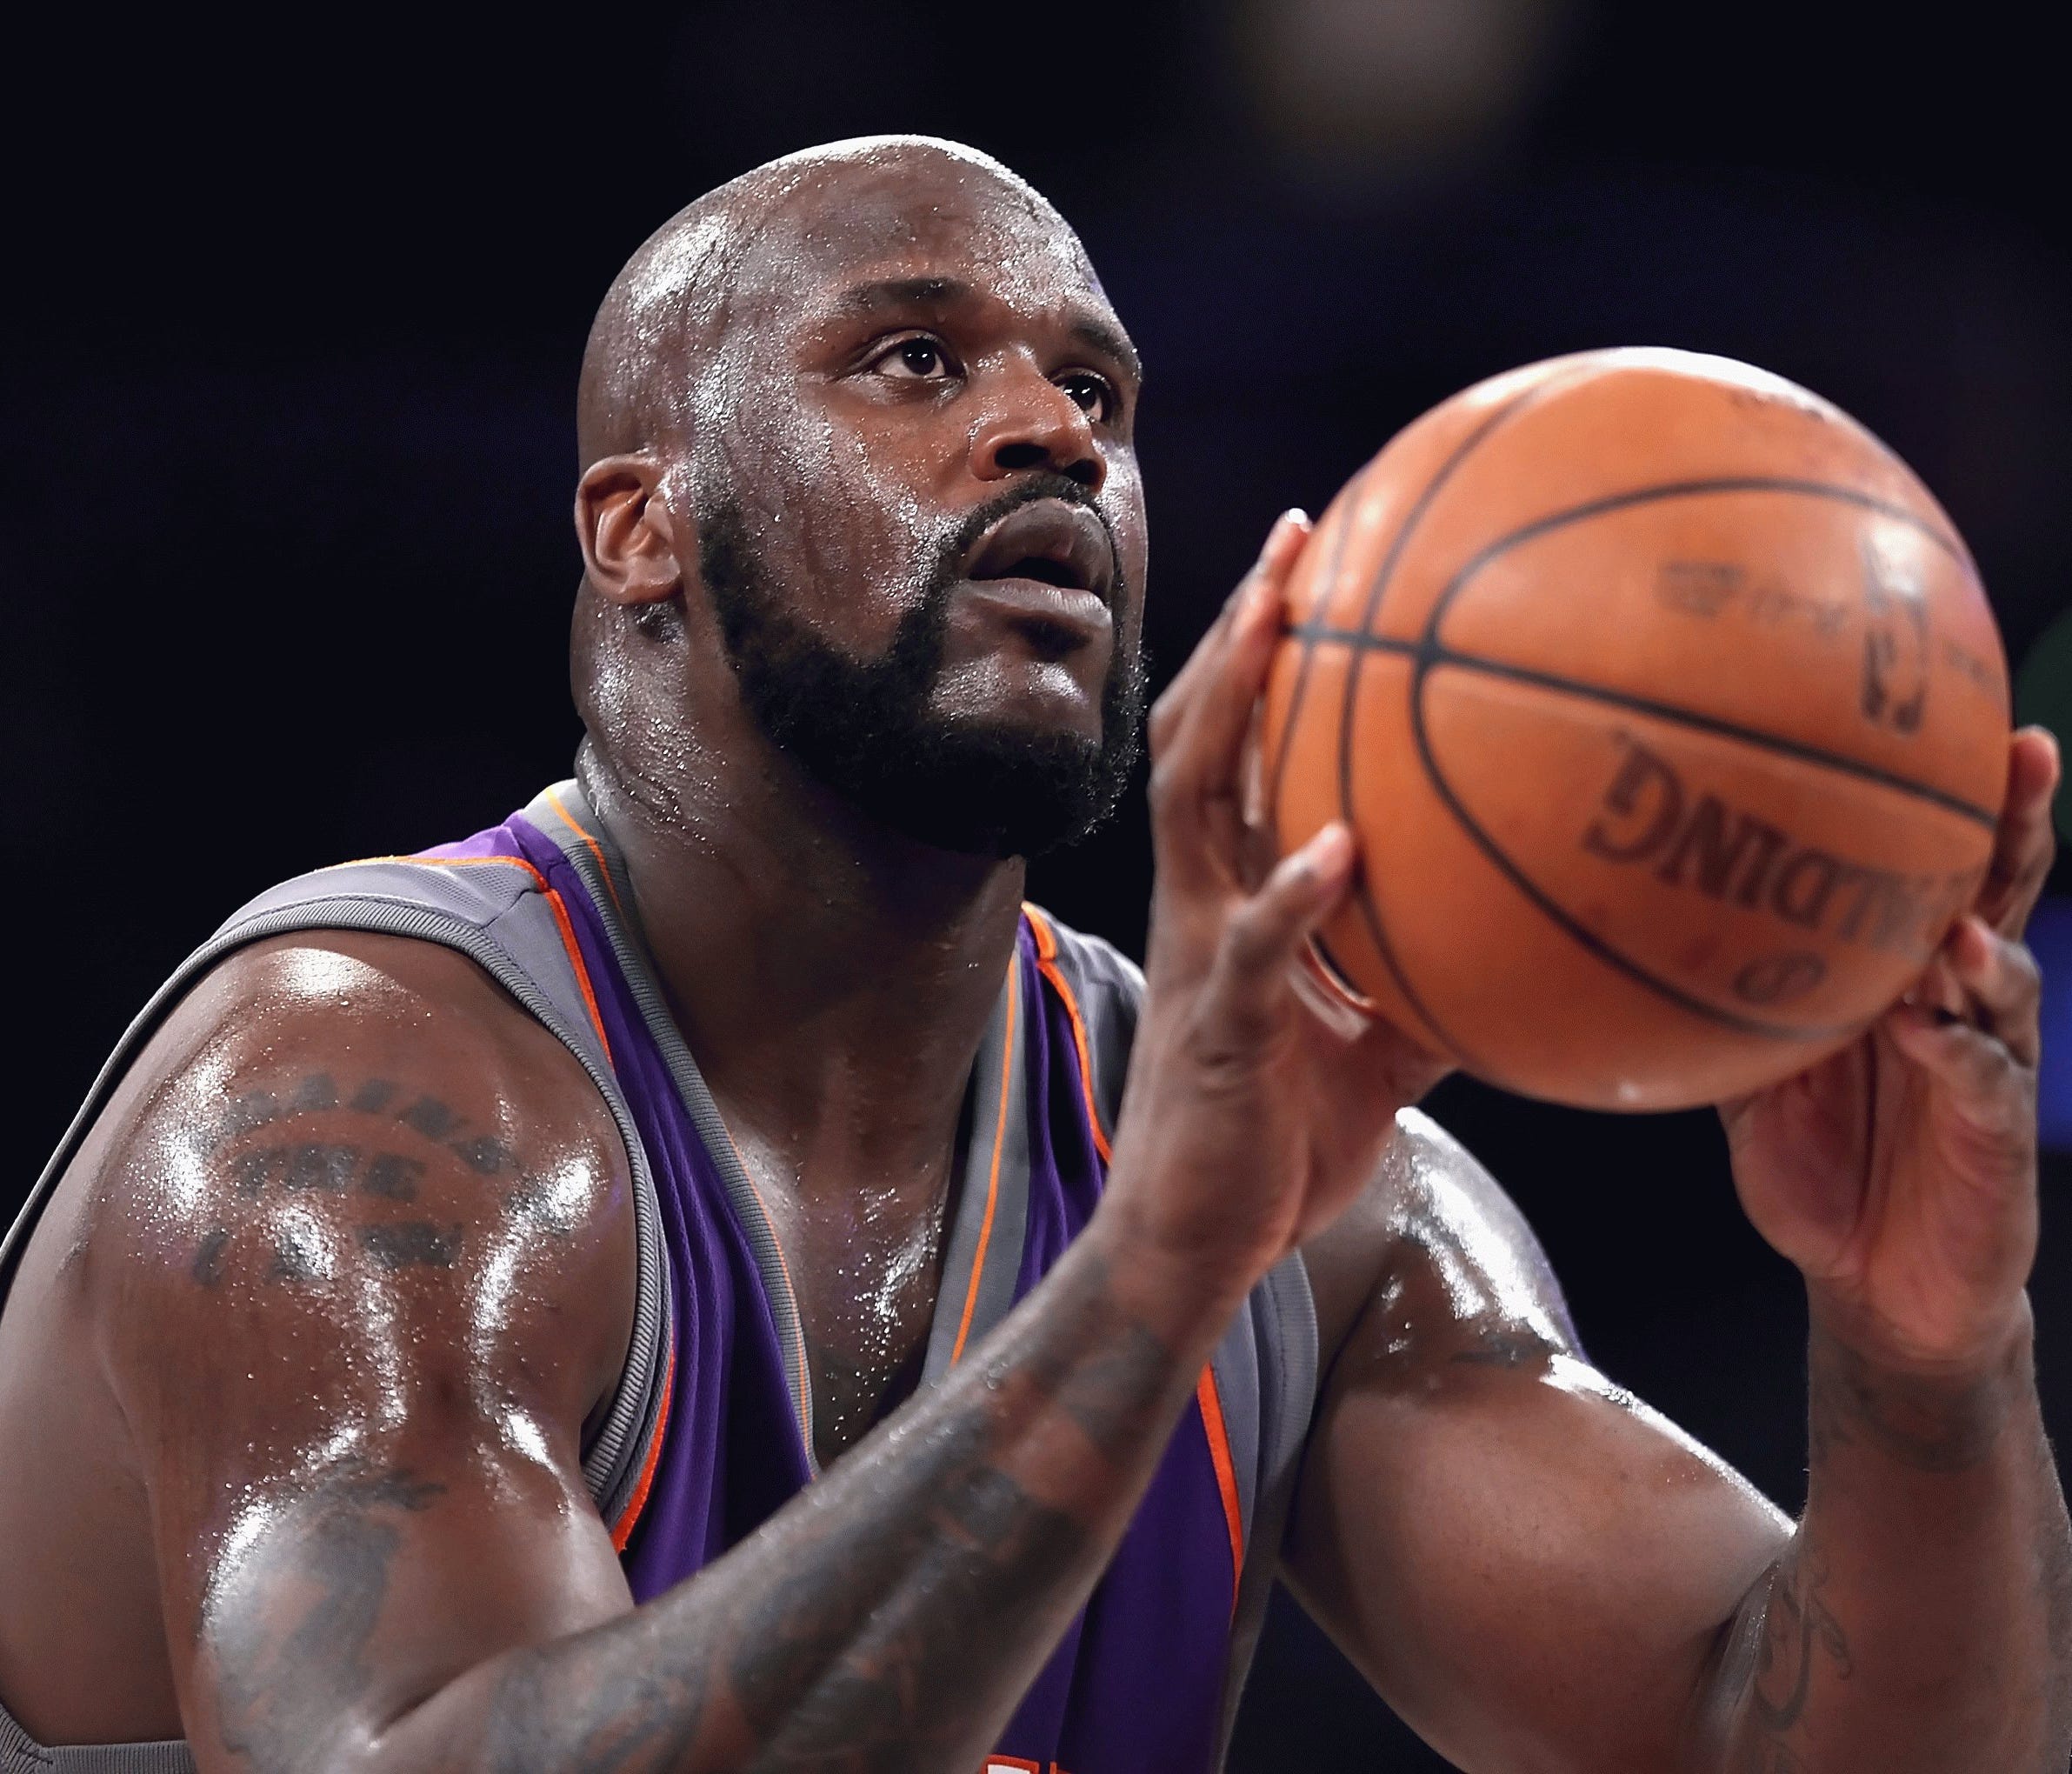 LOS ANGELES, CA - FEBRUARY 26:  (FILE PHOTO) Shaquille O'Neal #32 of the Phoenix Suns shoots a free throw shot during the NBA game against the Los Angeles Lakers at Staples Center on February 26, 2009 in Los Angeles, California.    The Lakers defeate